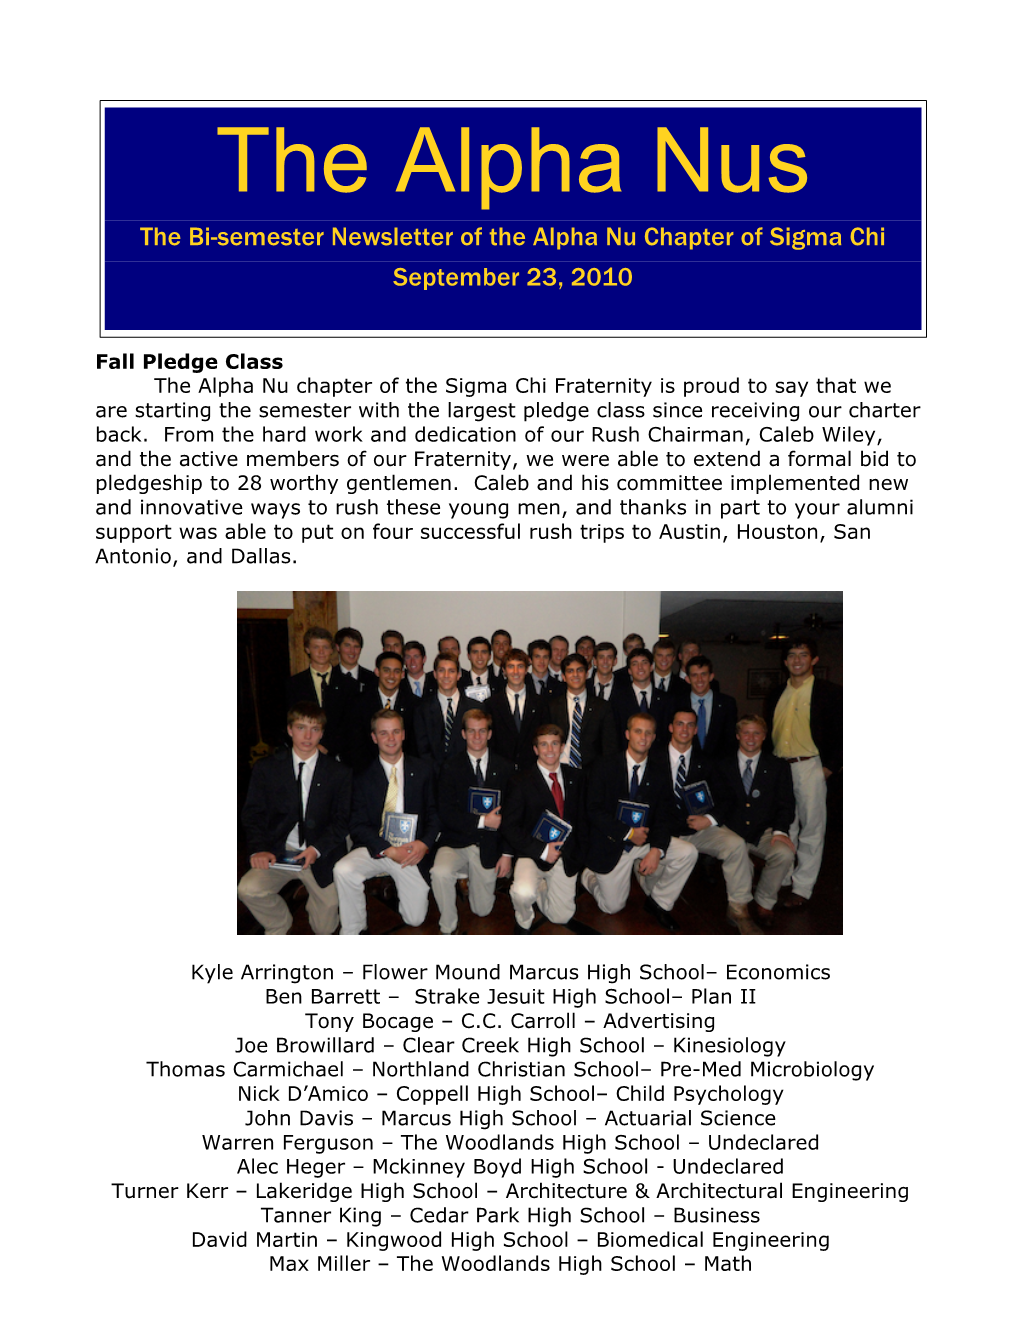 The Alpha Nus the Bi-Semester Newsletter of the Alpha Nu Chapter of Sigma Chi September 23, 2010